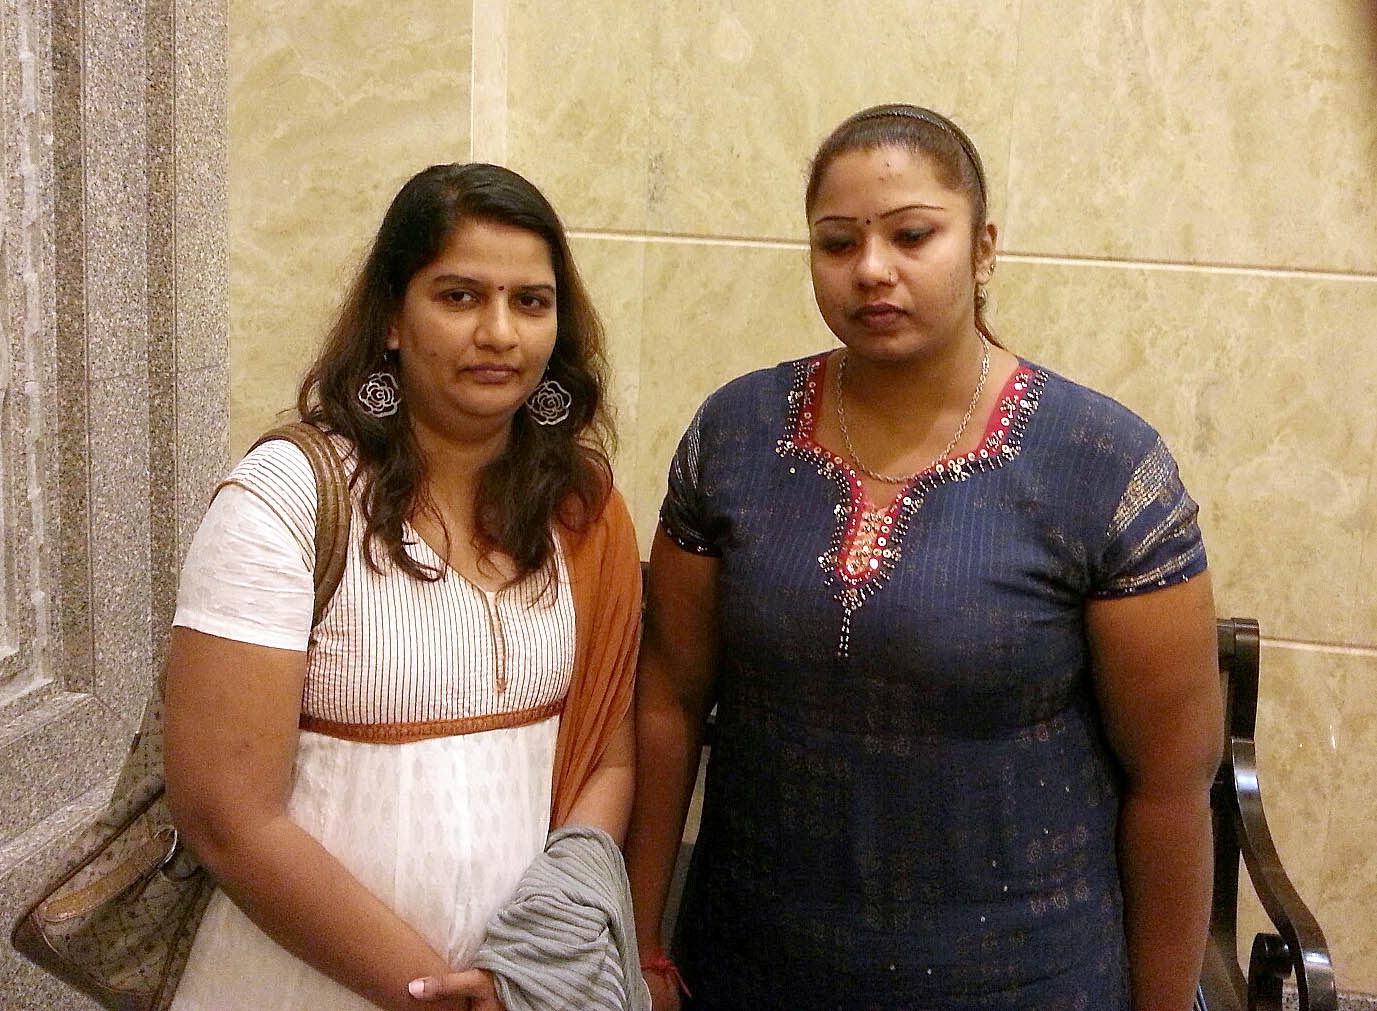 M. Indira Gandhi (left) and S. Deepa are the focus of custody battles involving their former husbands who are Muslim converts. – The Malaysian Insider file pic, February 23, 2016. 